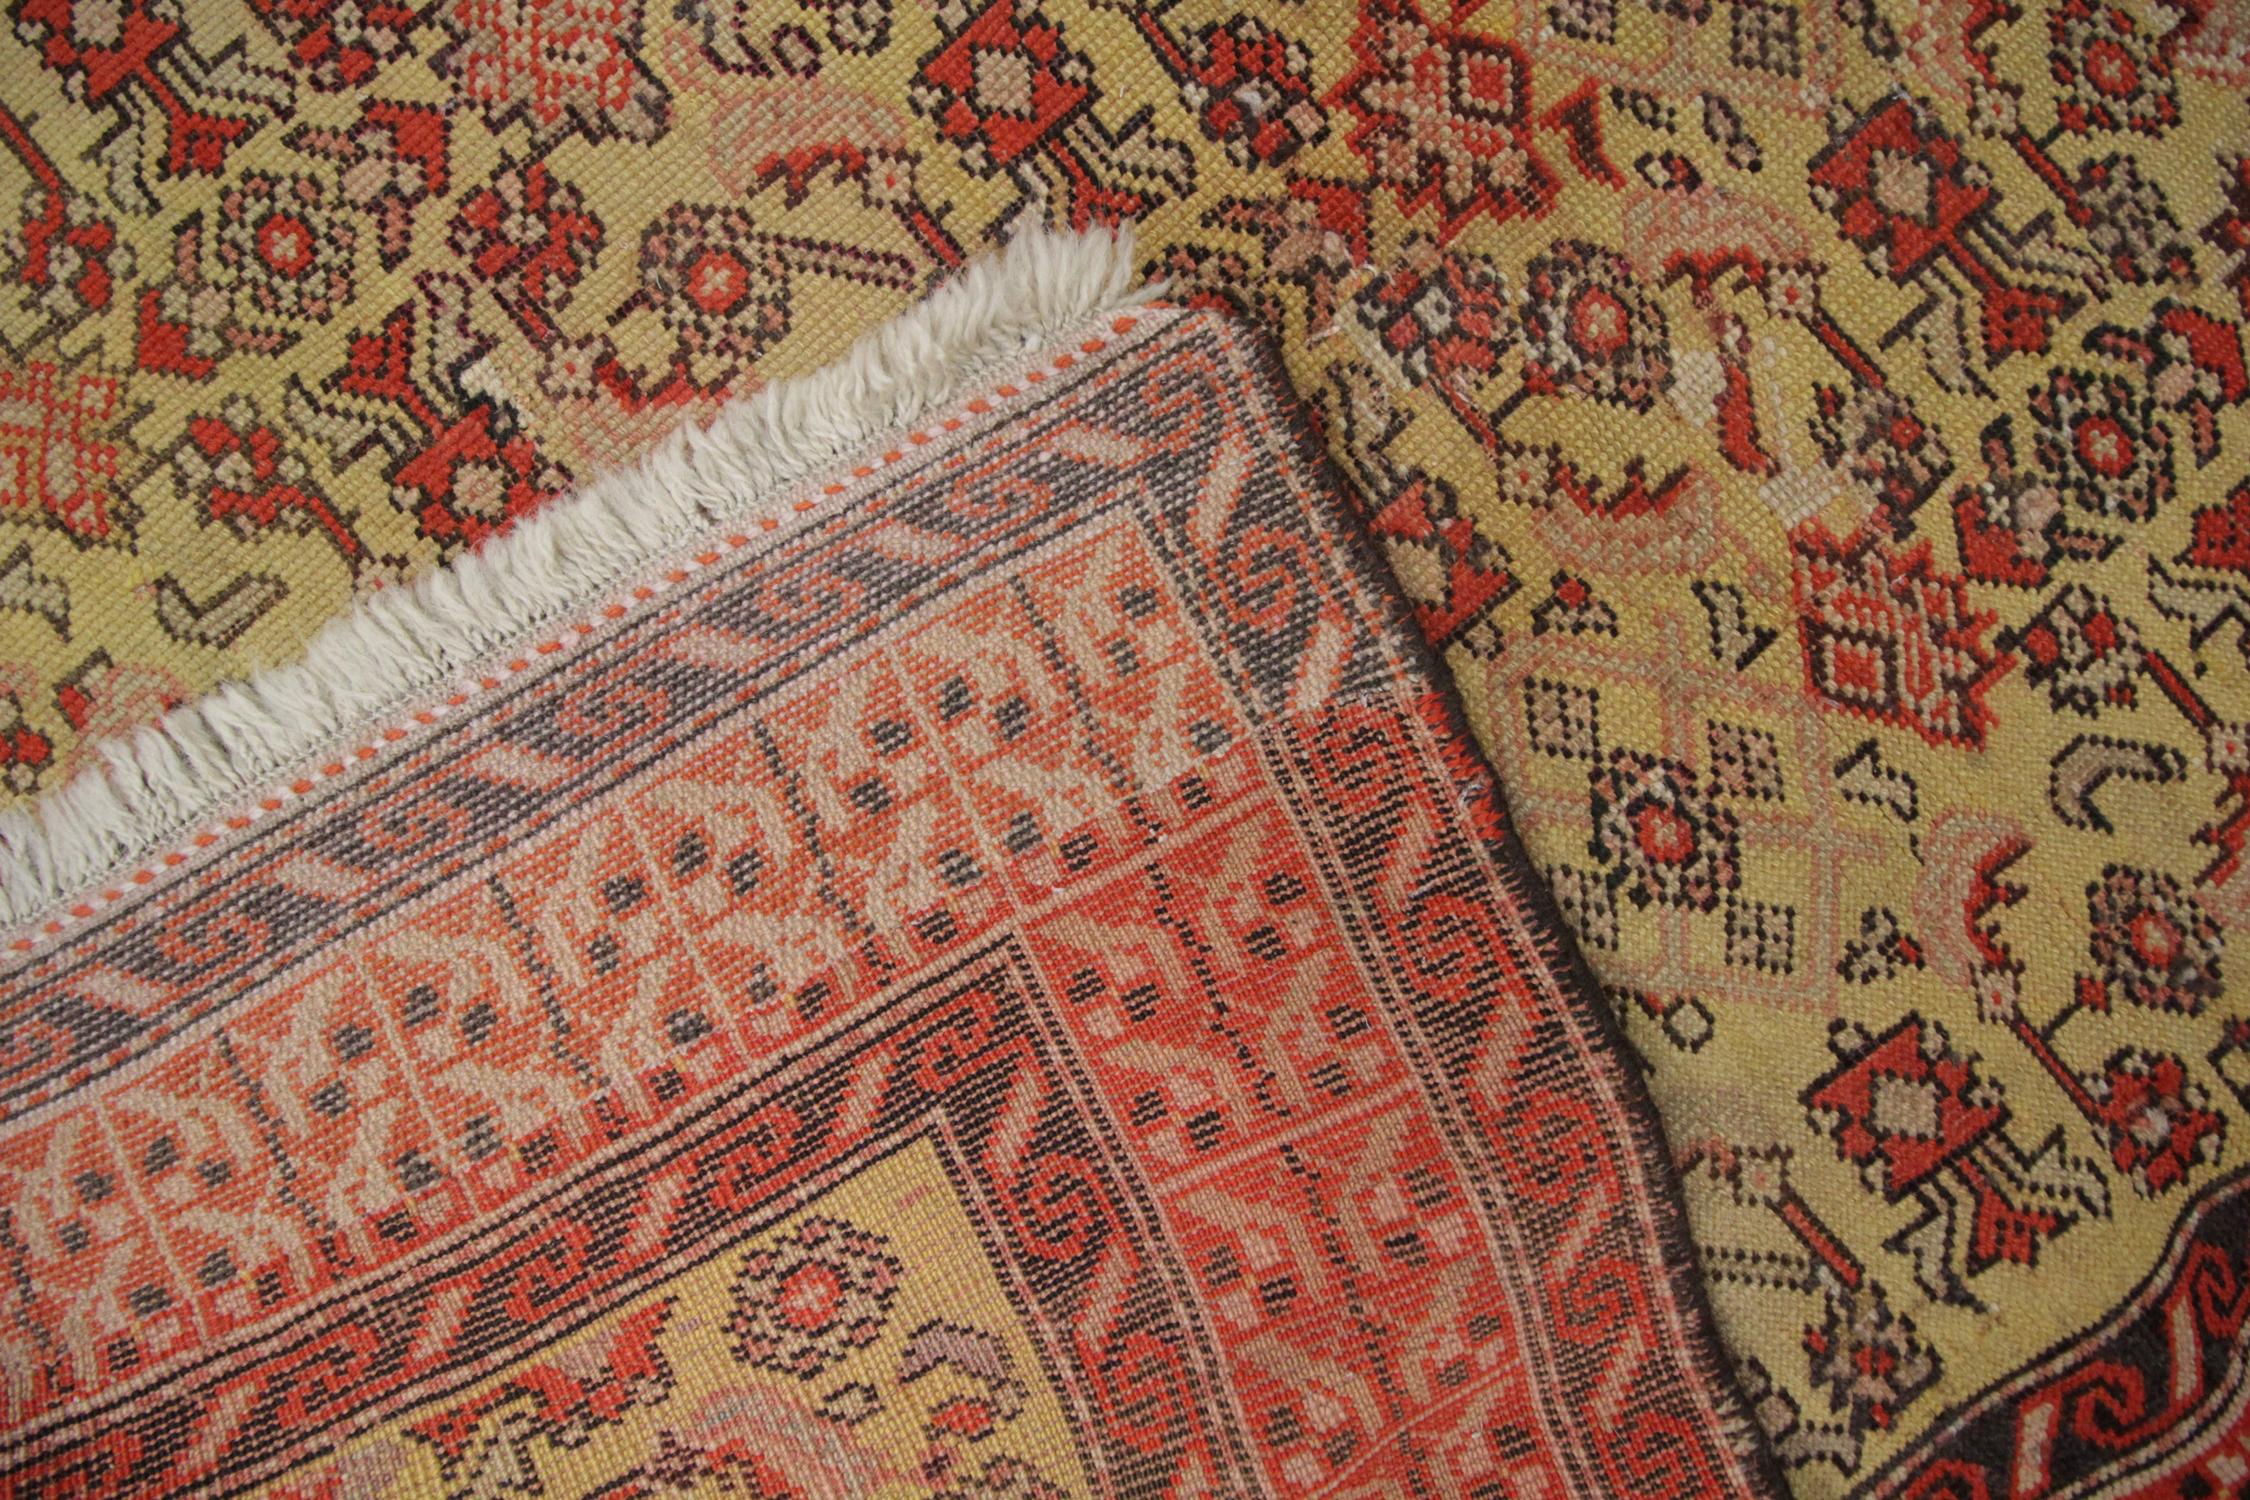 Quality Antique Rug Caucasian Karabag Handmade Carpet Oriental Wool Rug for Sale In Excellent Condition For Sale In Hampshire, GB